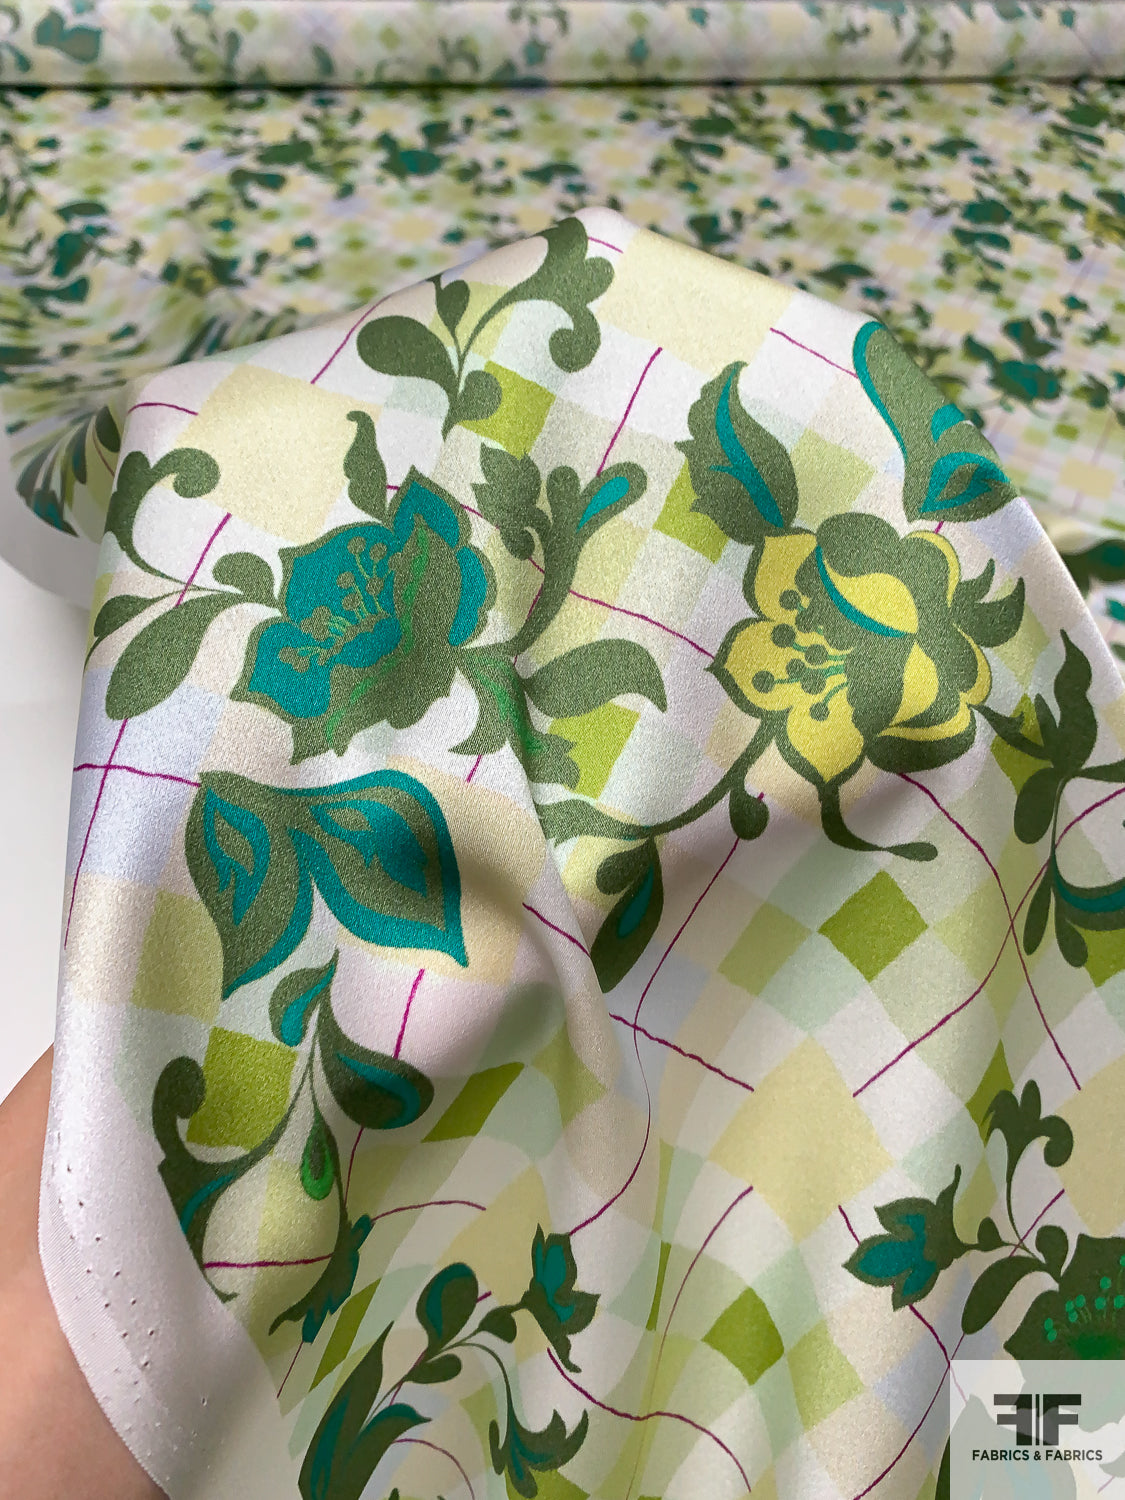 Argyle Plaid and Floral Vines Printed Silk Charmeuse - Greens / Soft Yellow / Sky Blue